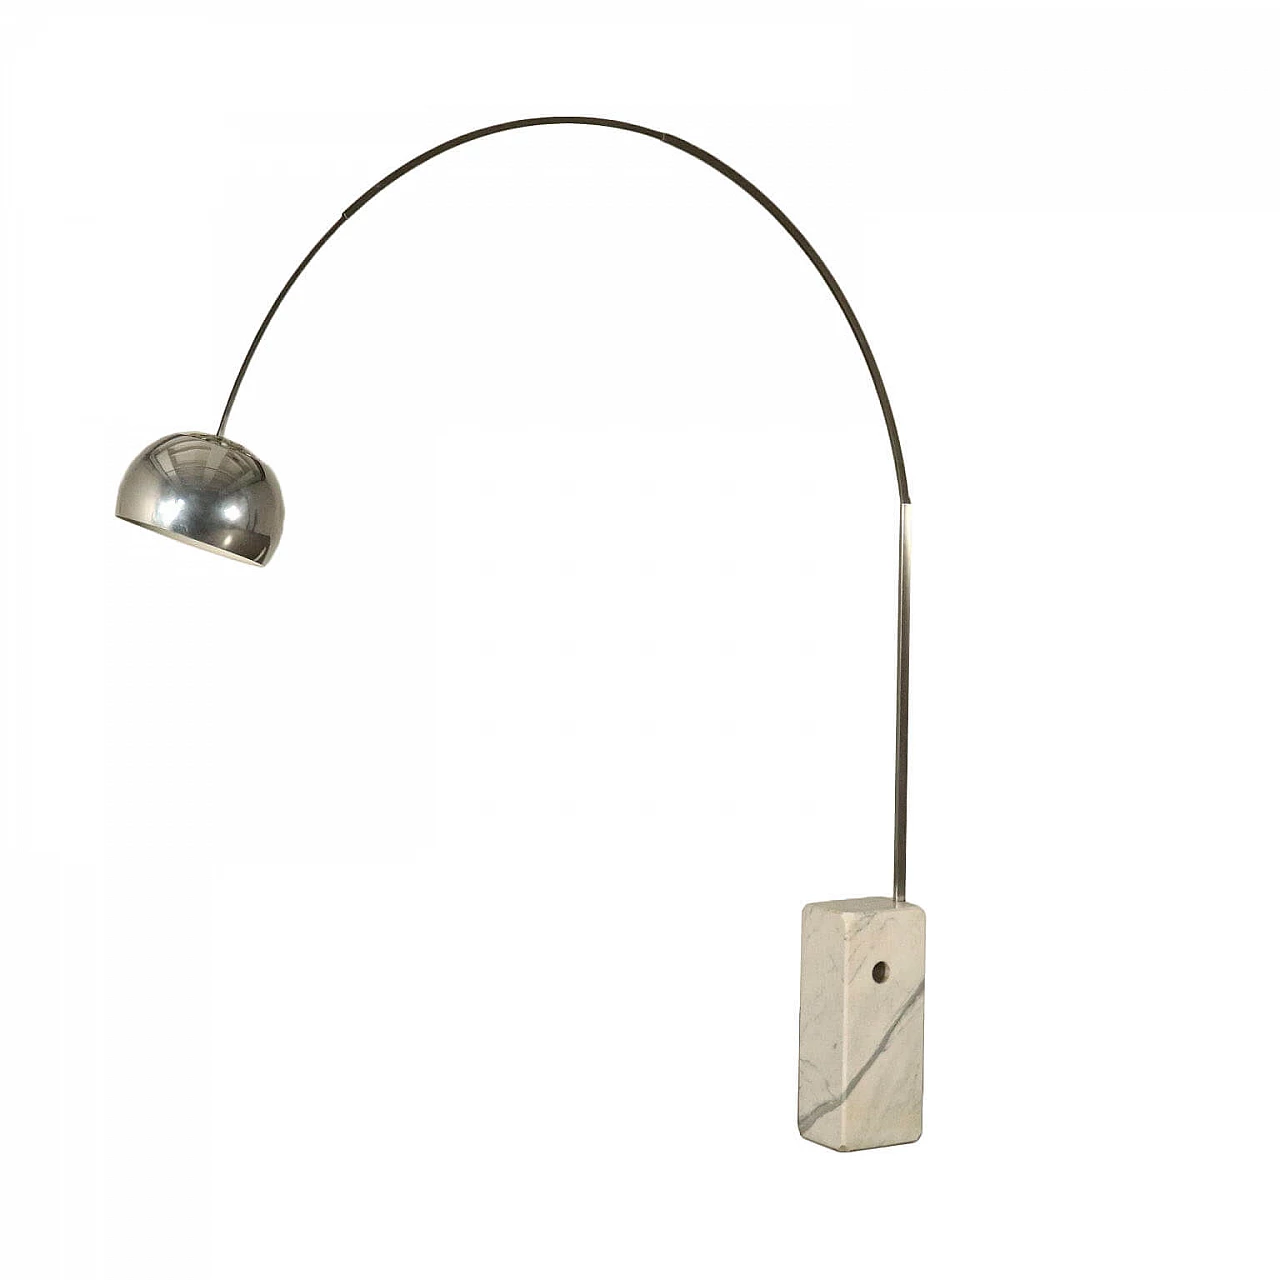 Arco lamp by Achille and Pier Giacomo Castiglioni for Flos, 1960s 1101857